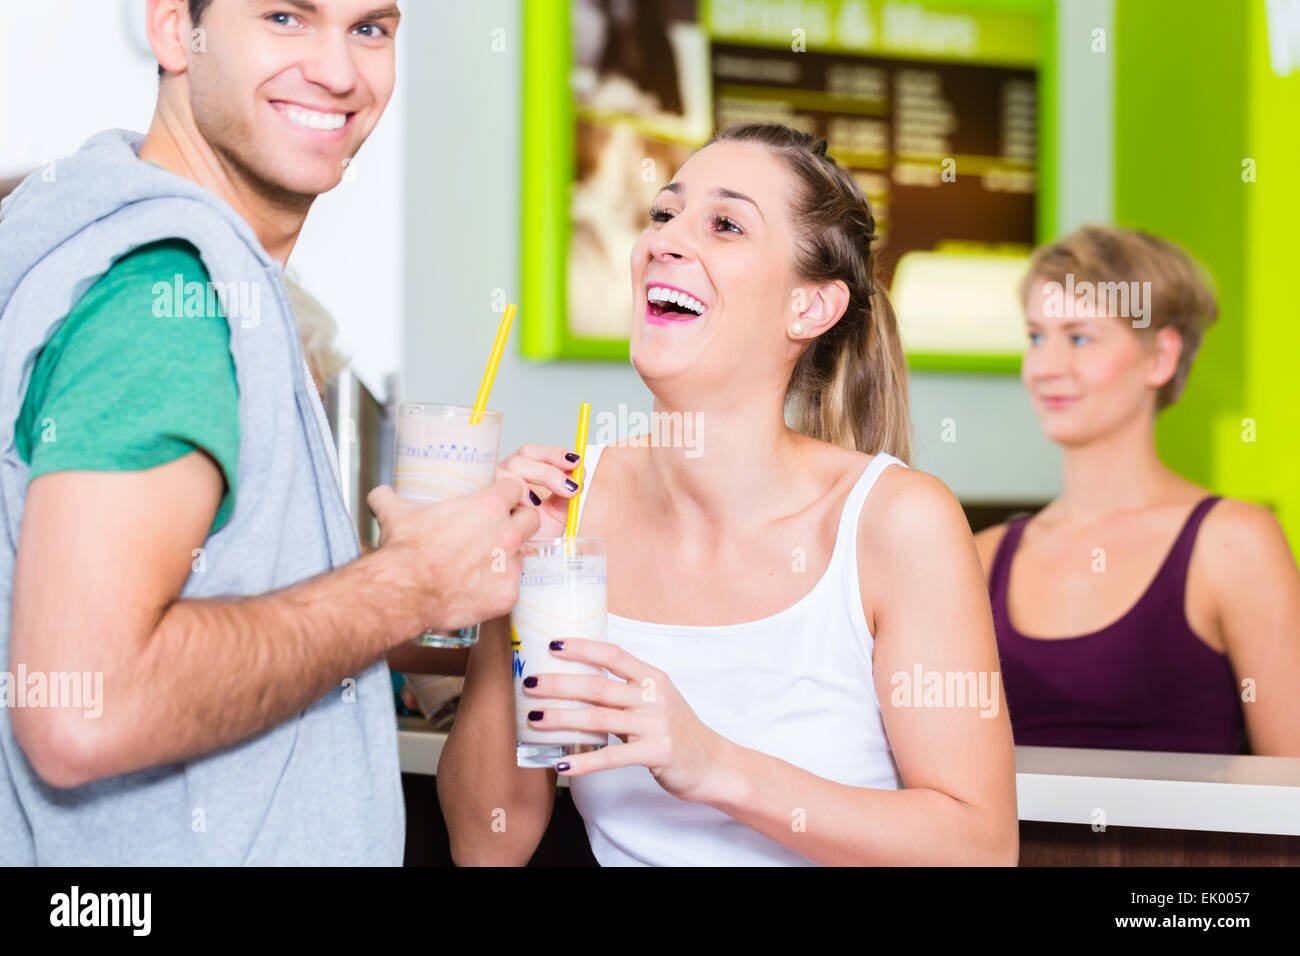 People drinking protein shakes in fitness gym bar Stock Photo